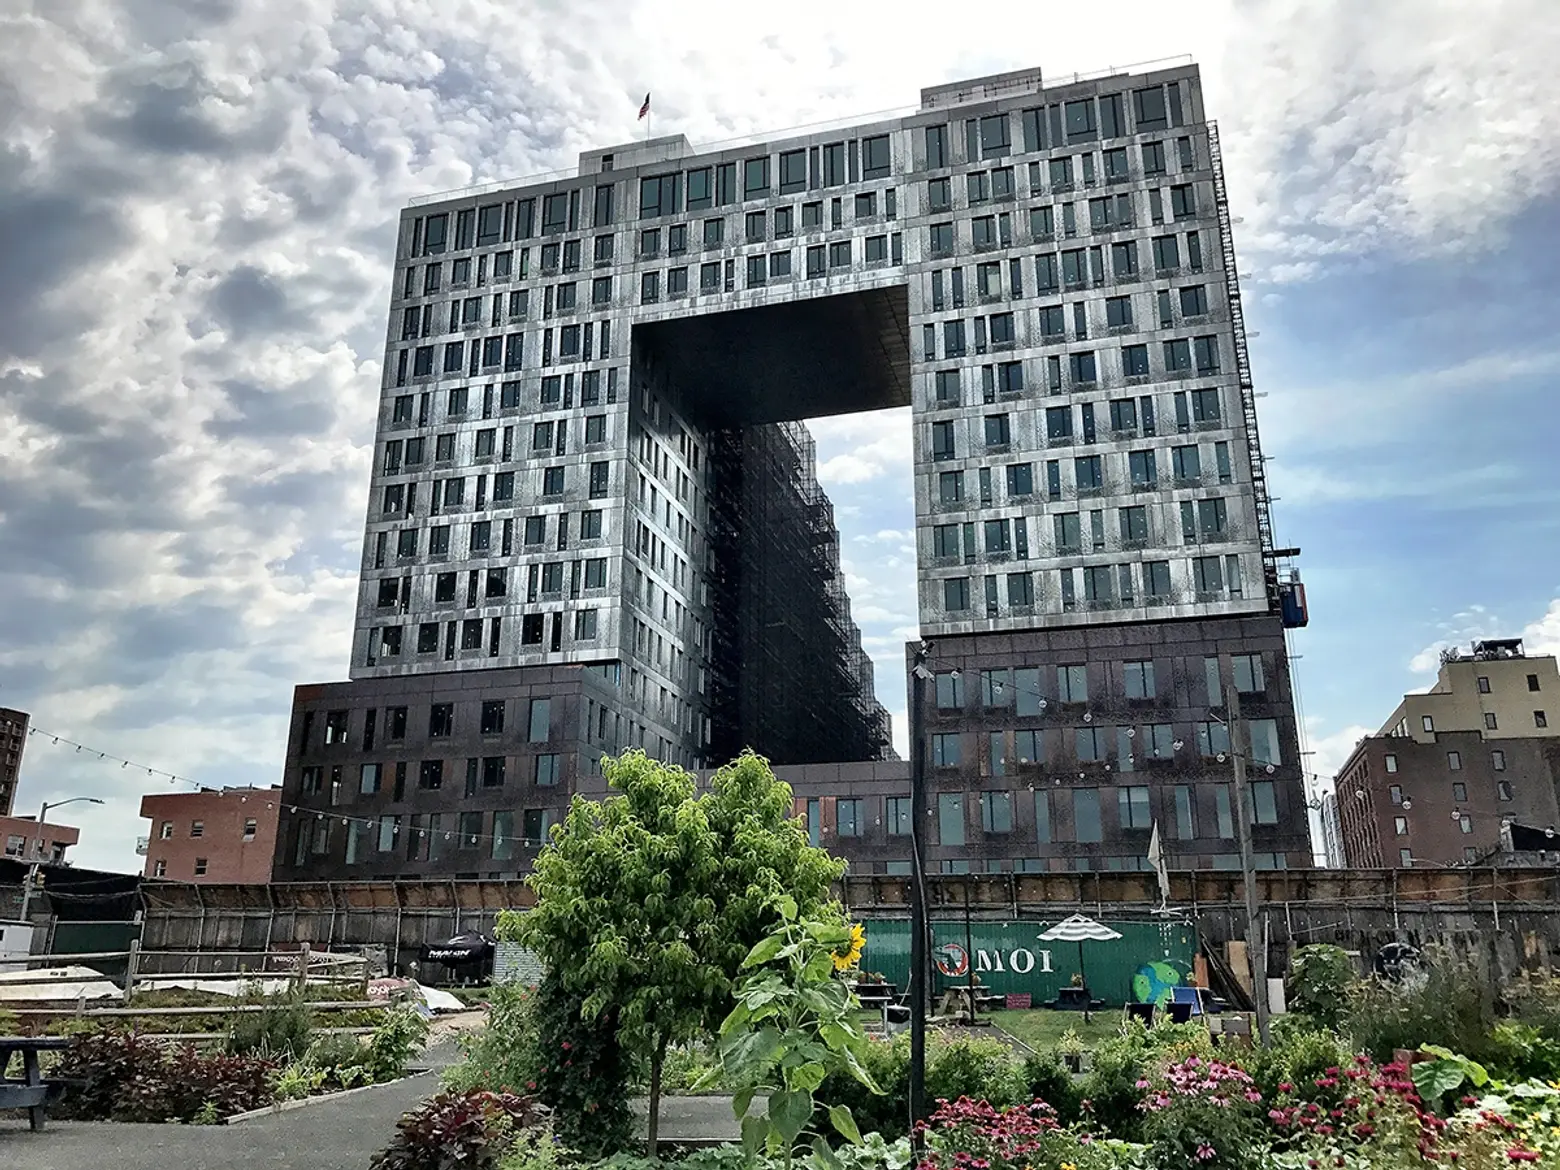 Construction Update: SHoP’s first Domino Sugar Factory building approaches completion